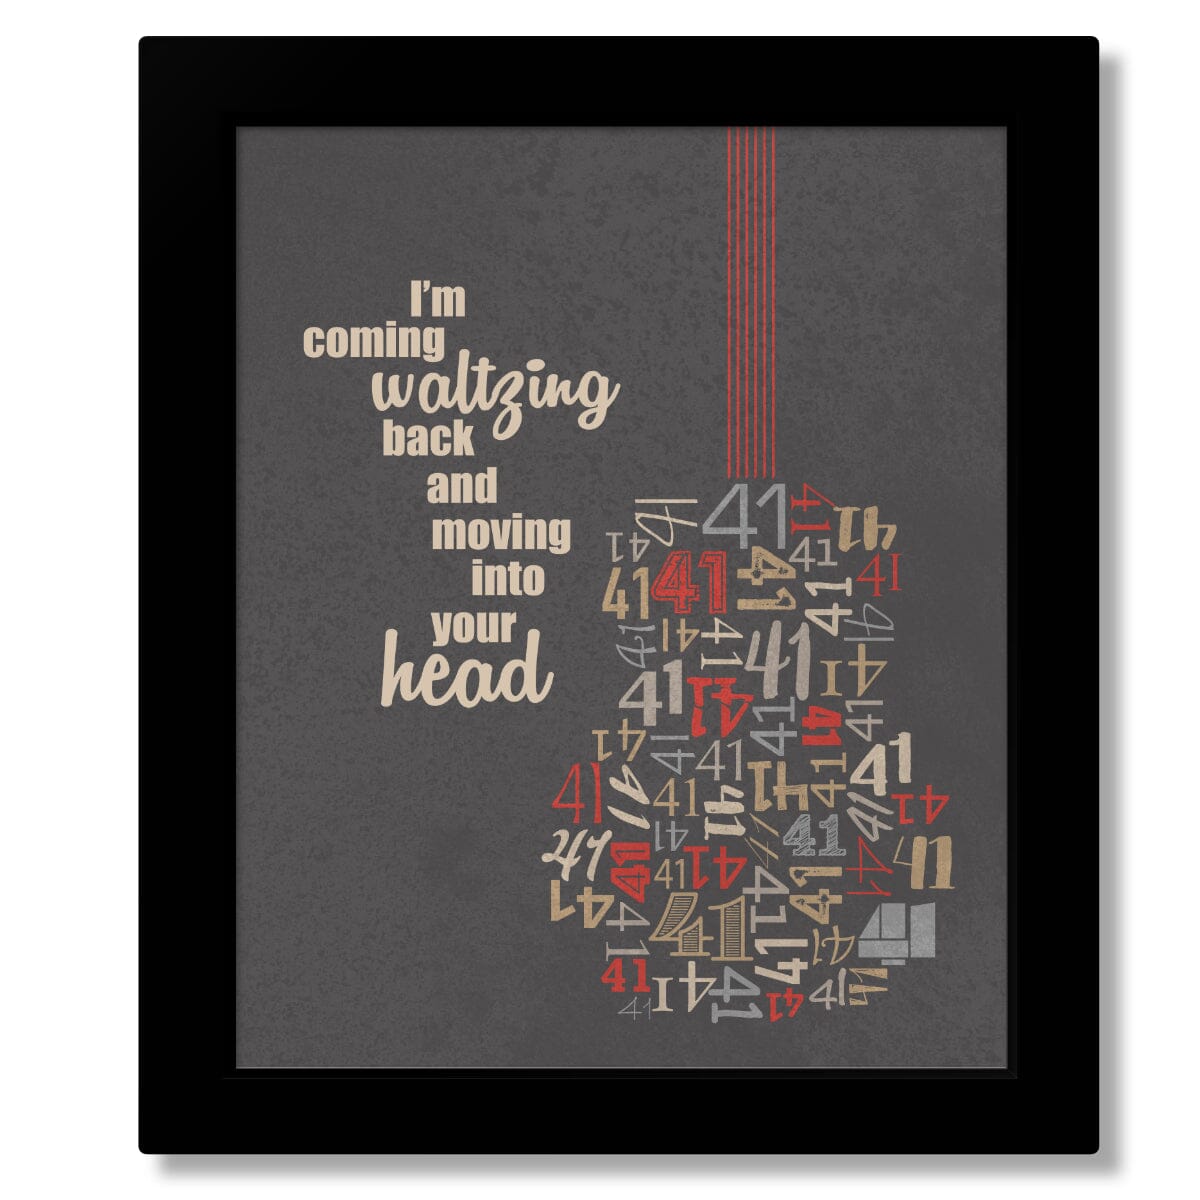 No 41 Number by Dave Matthews Band - Lyric Inspired Art Song Lyrics Art Song Lyrics Art 8x10 Framed Print (without mat) 